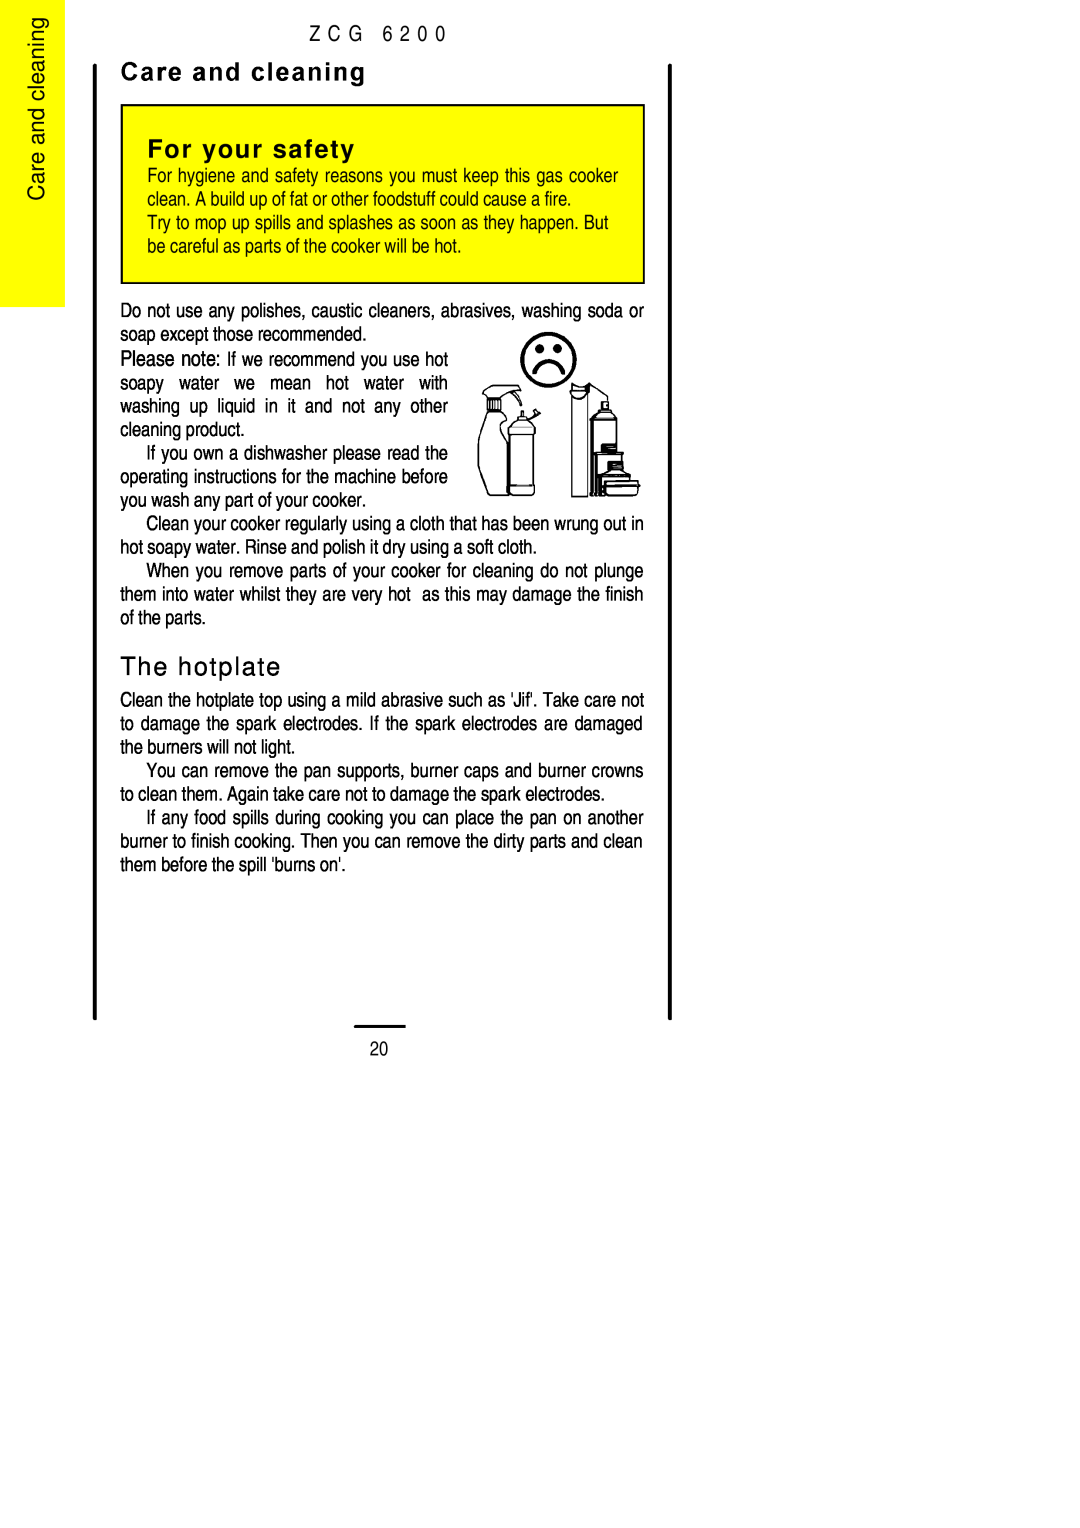 Zanussi ZCG 6200 installation instructions The hotplate, Care and cleaning, For your safety, Z C G 